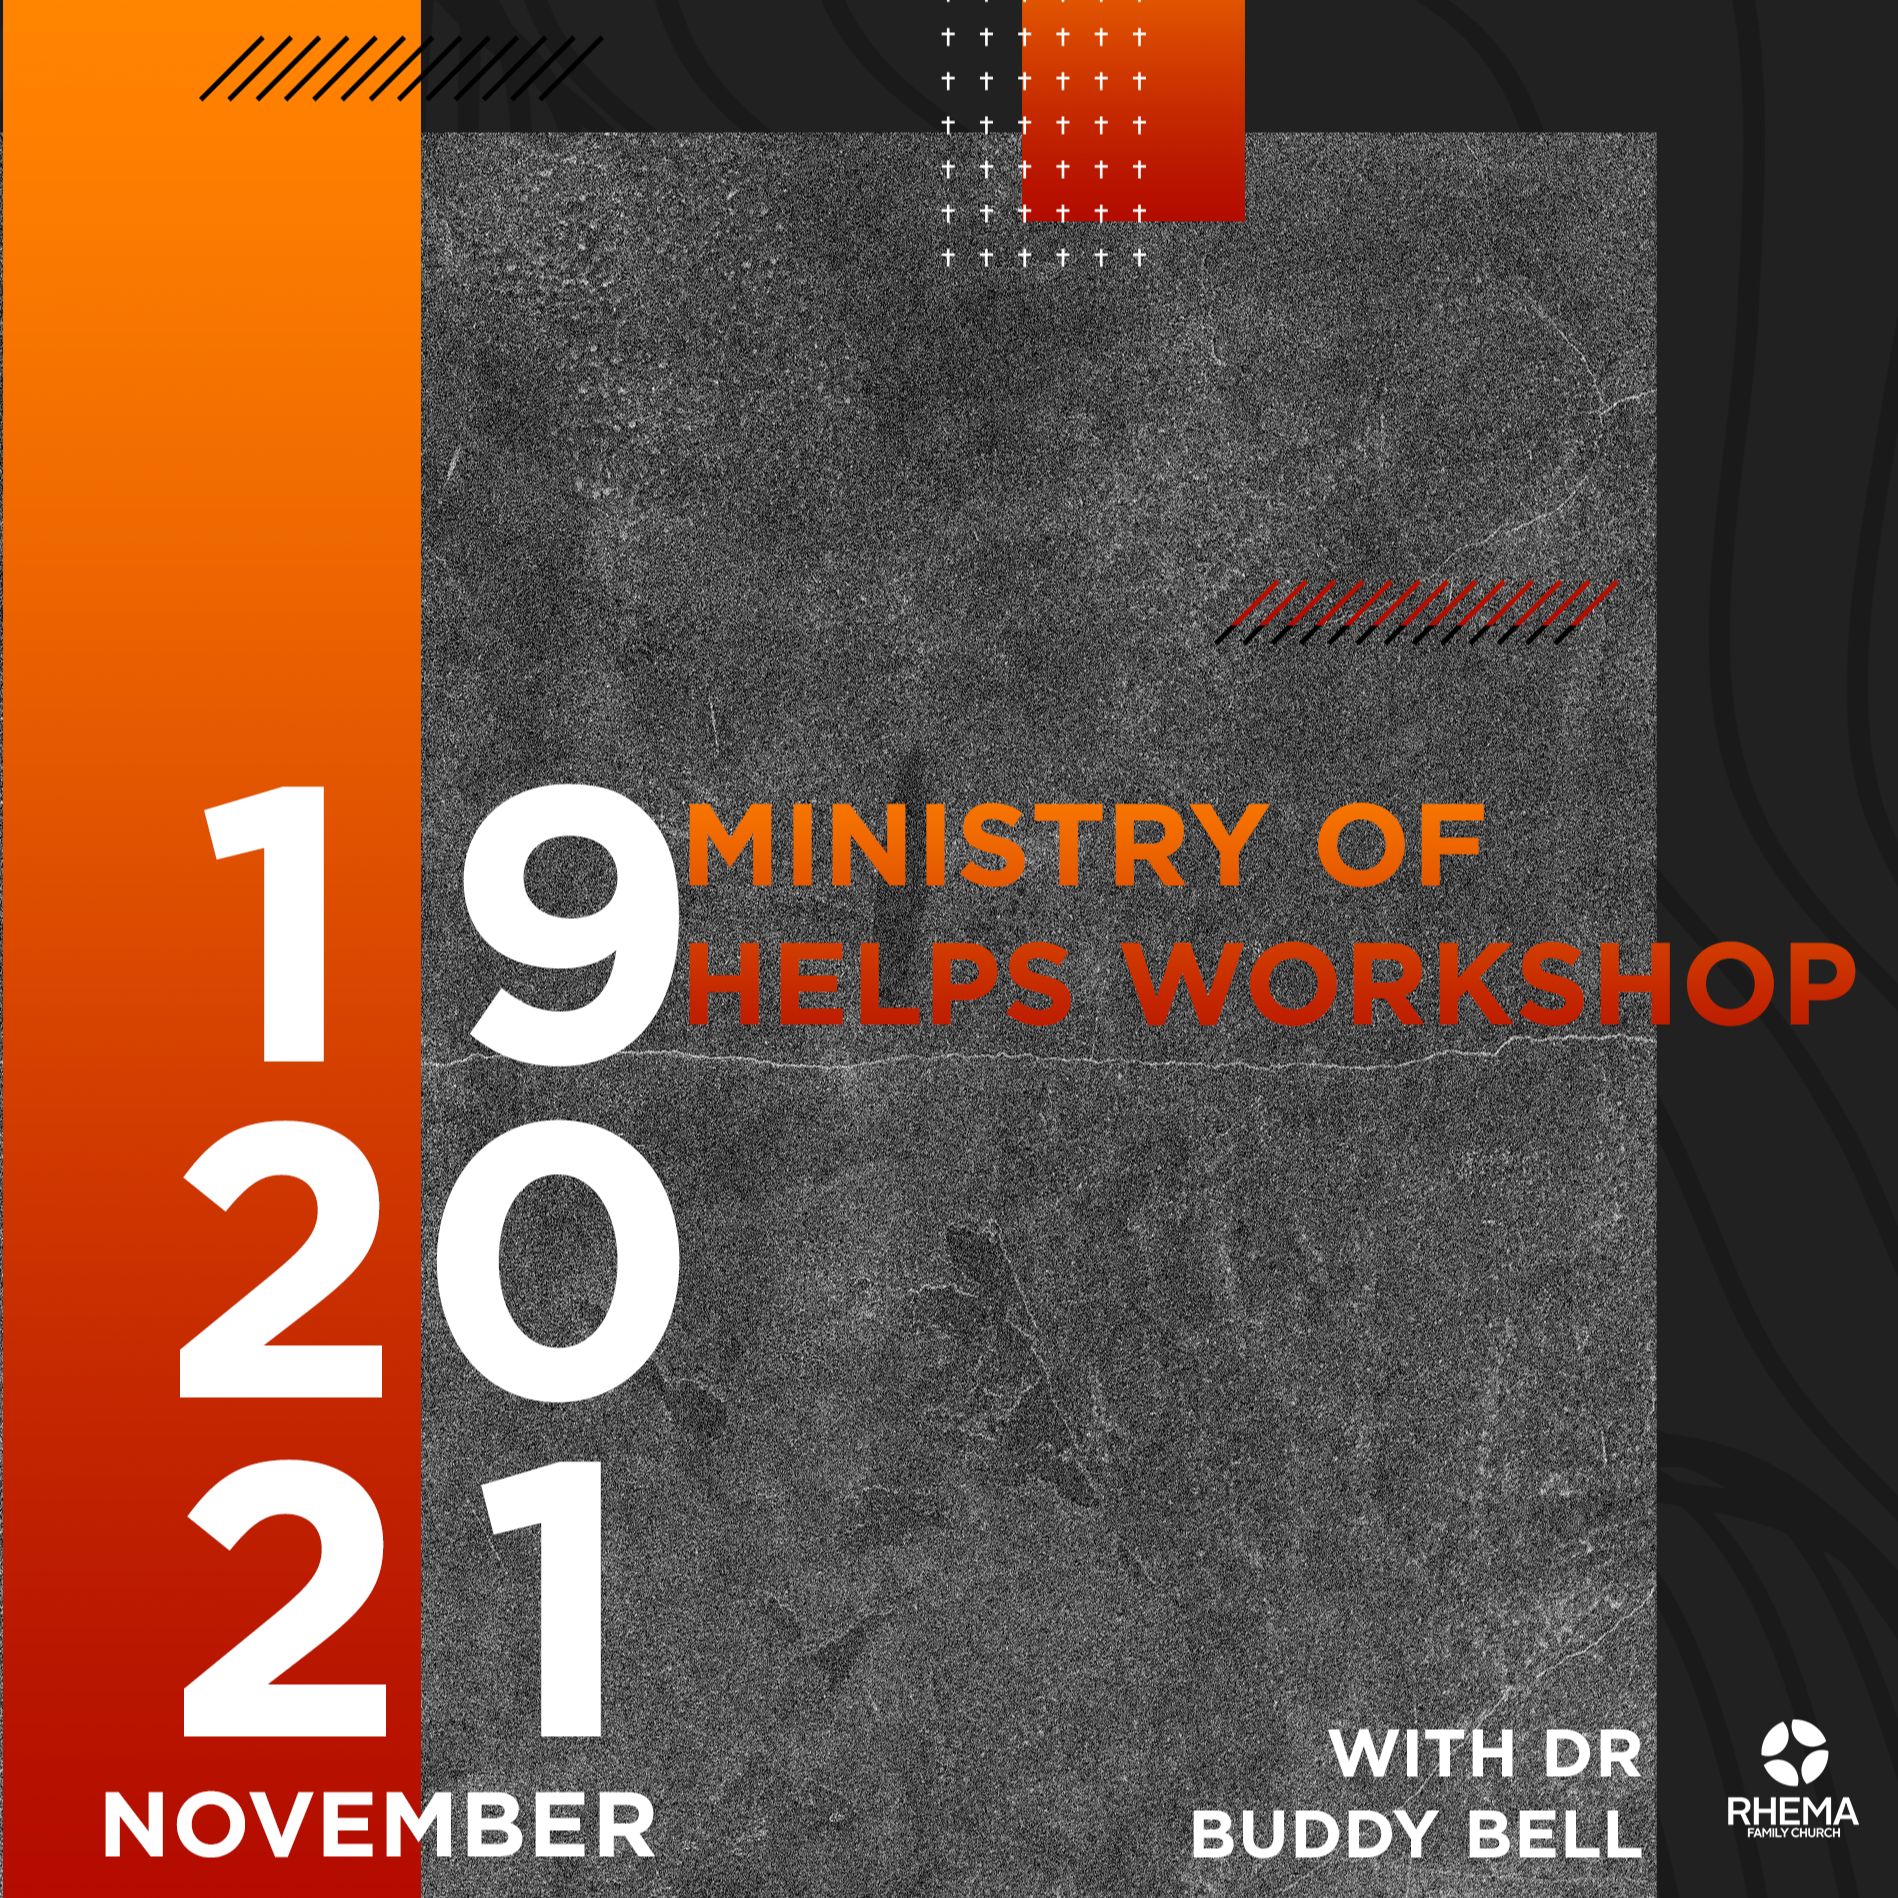 3. Ministry of Helps Workshop - Buddy Bell